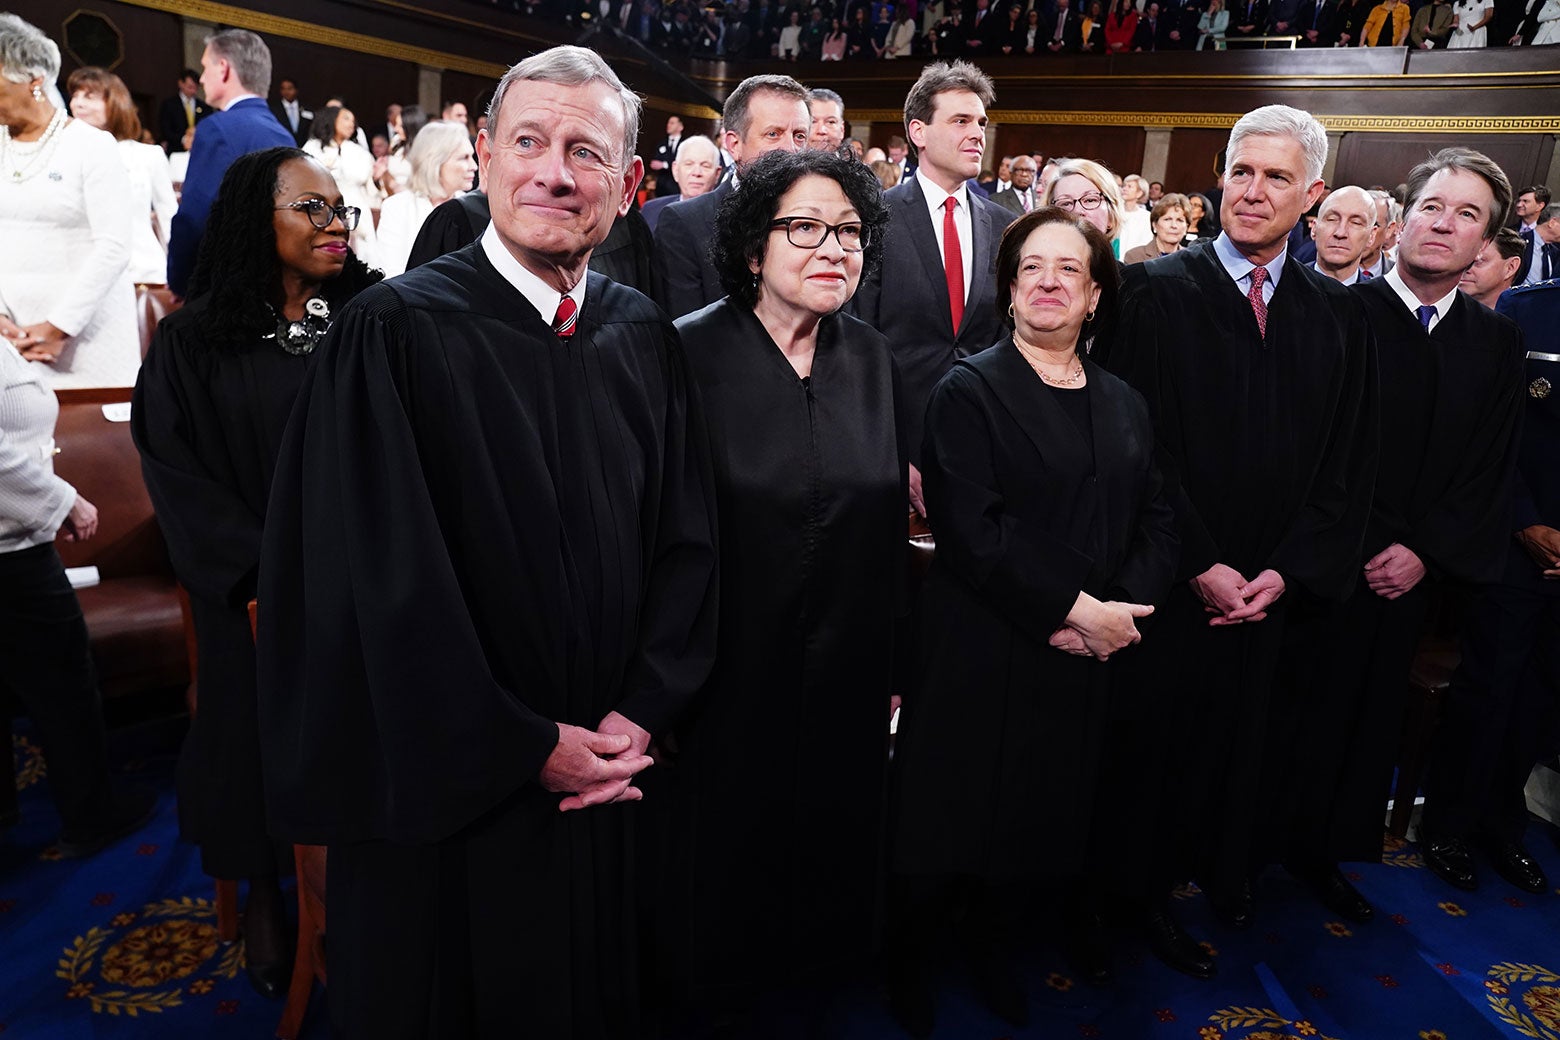 John Roberts, Sonia Sotomayor, Elena Kagan, Neil Gorsuch, and Brett Kavanaugh stand dressed in their black robes on the House floor ahead of the annual State of the Union address on March 7.